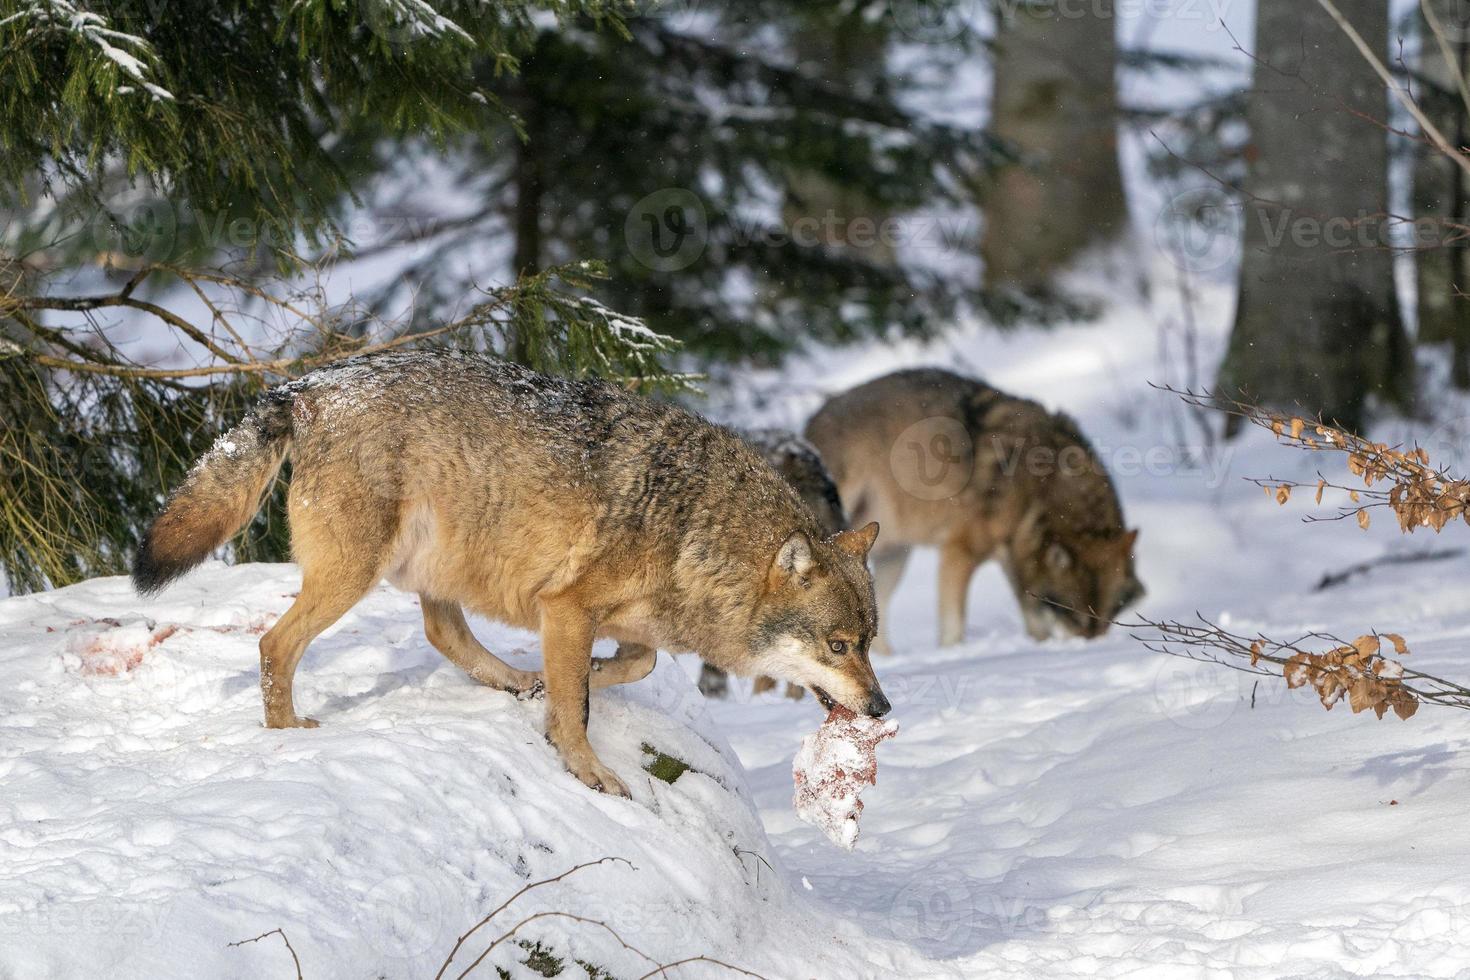 grey wolf in the snow eating meat photo